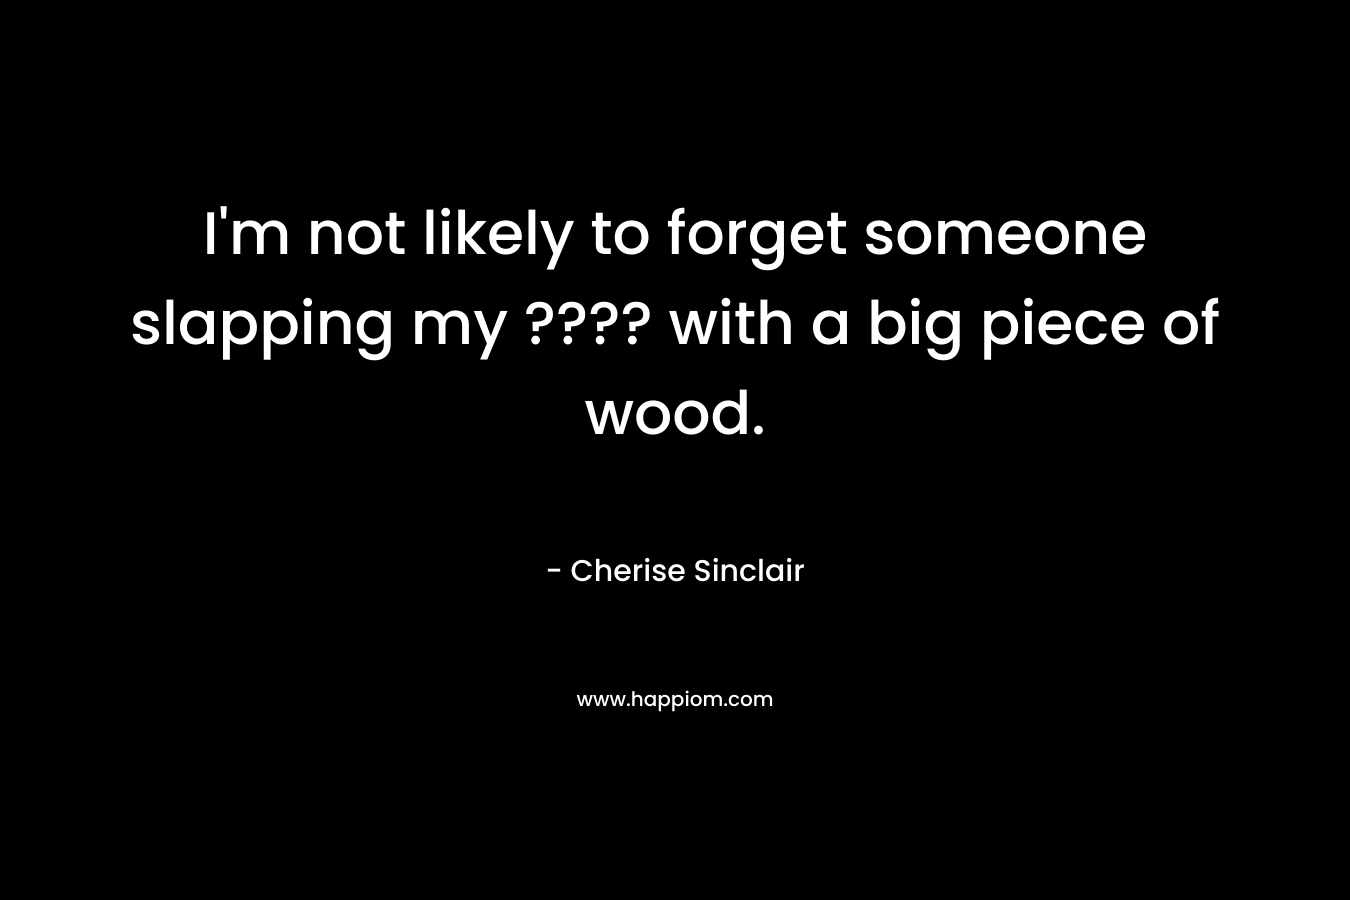 I’m not likely to forget someone slapping my ???? with a big piece of wood. – Cherise Sinclair